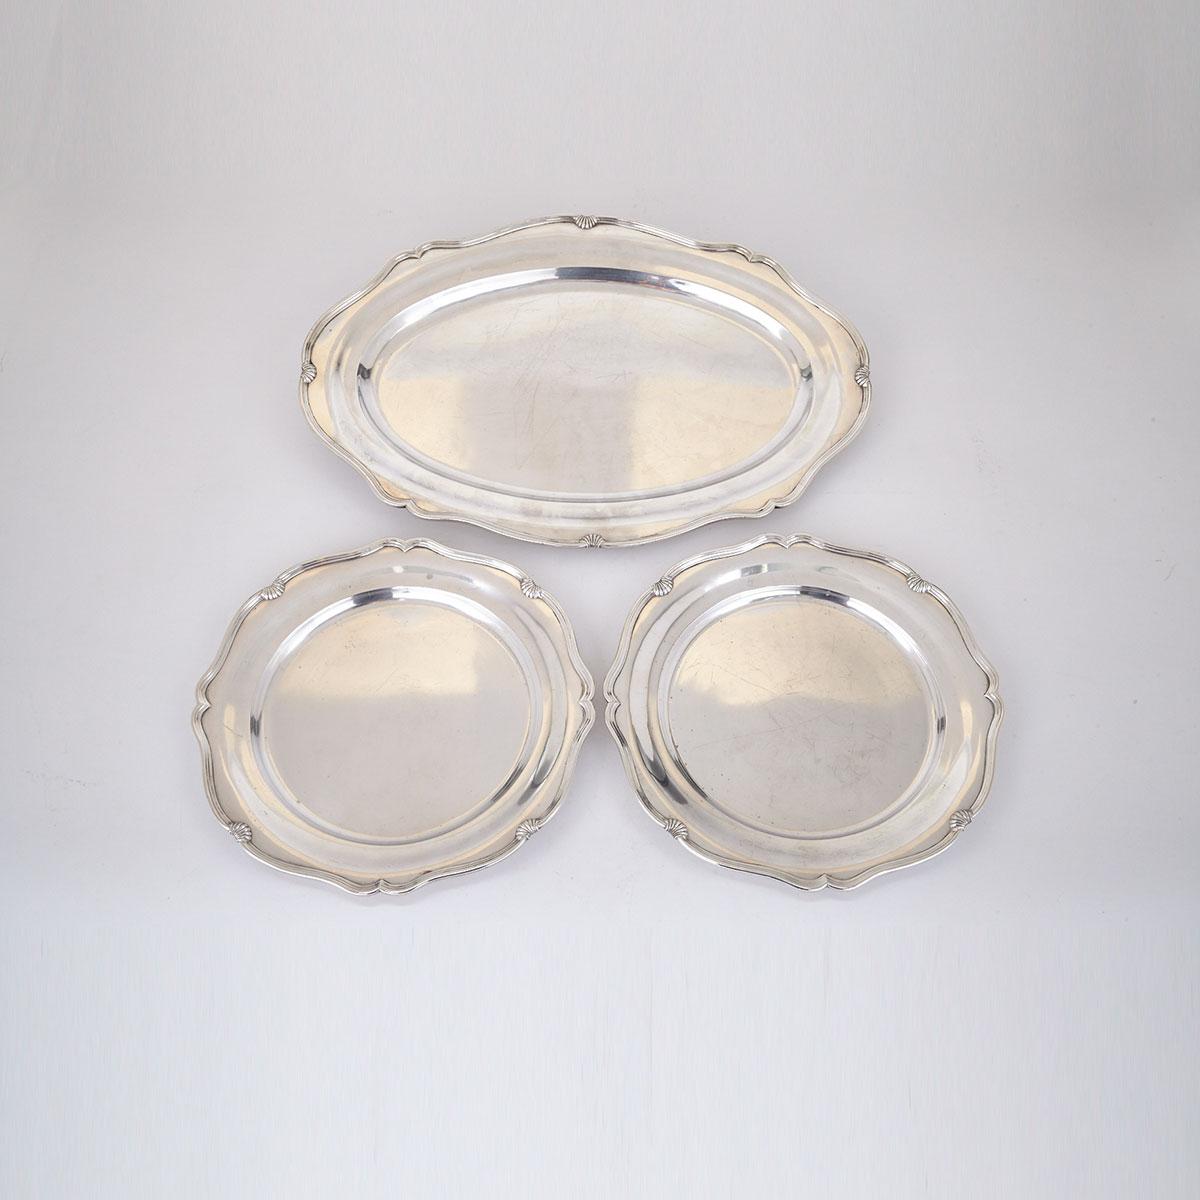 Egyptian Silver Oval Platter and a Pair of Matching Circular Dishes, Alexandria, 20th Century